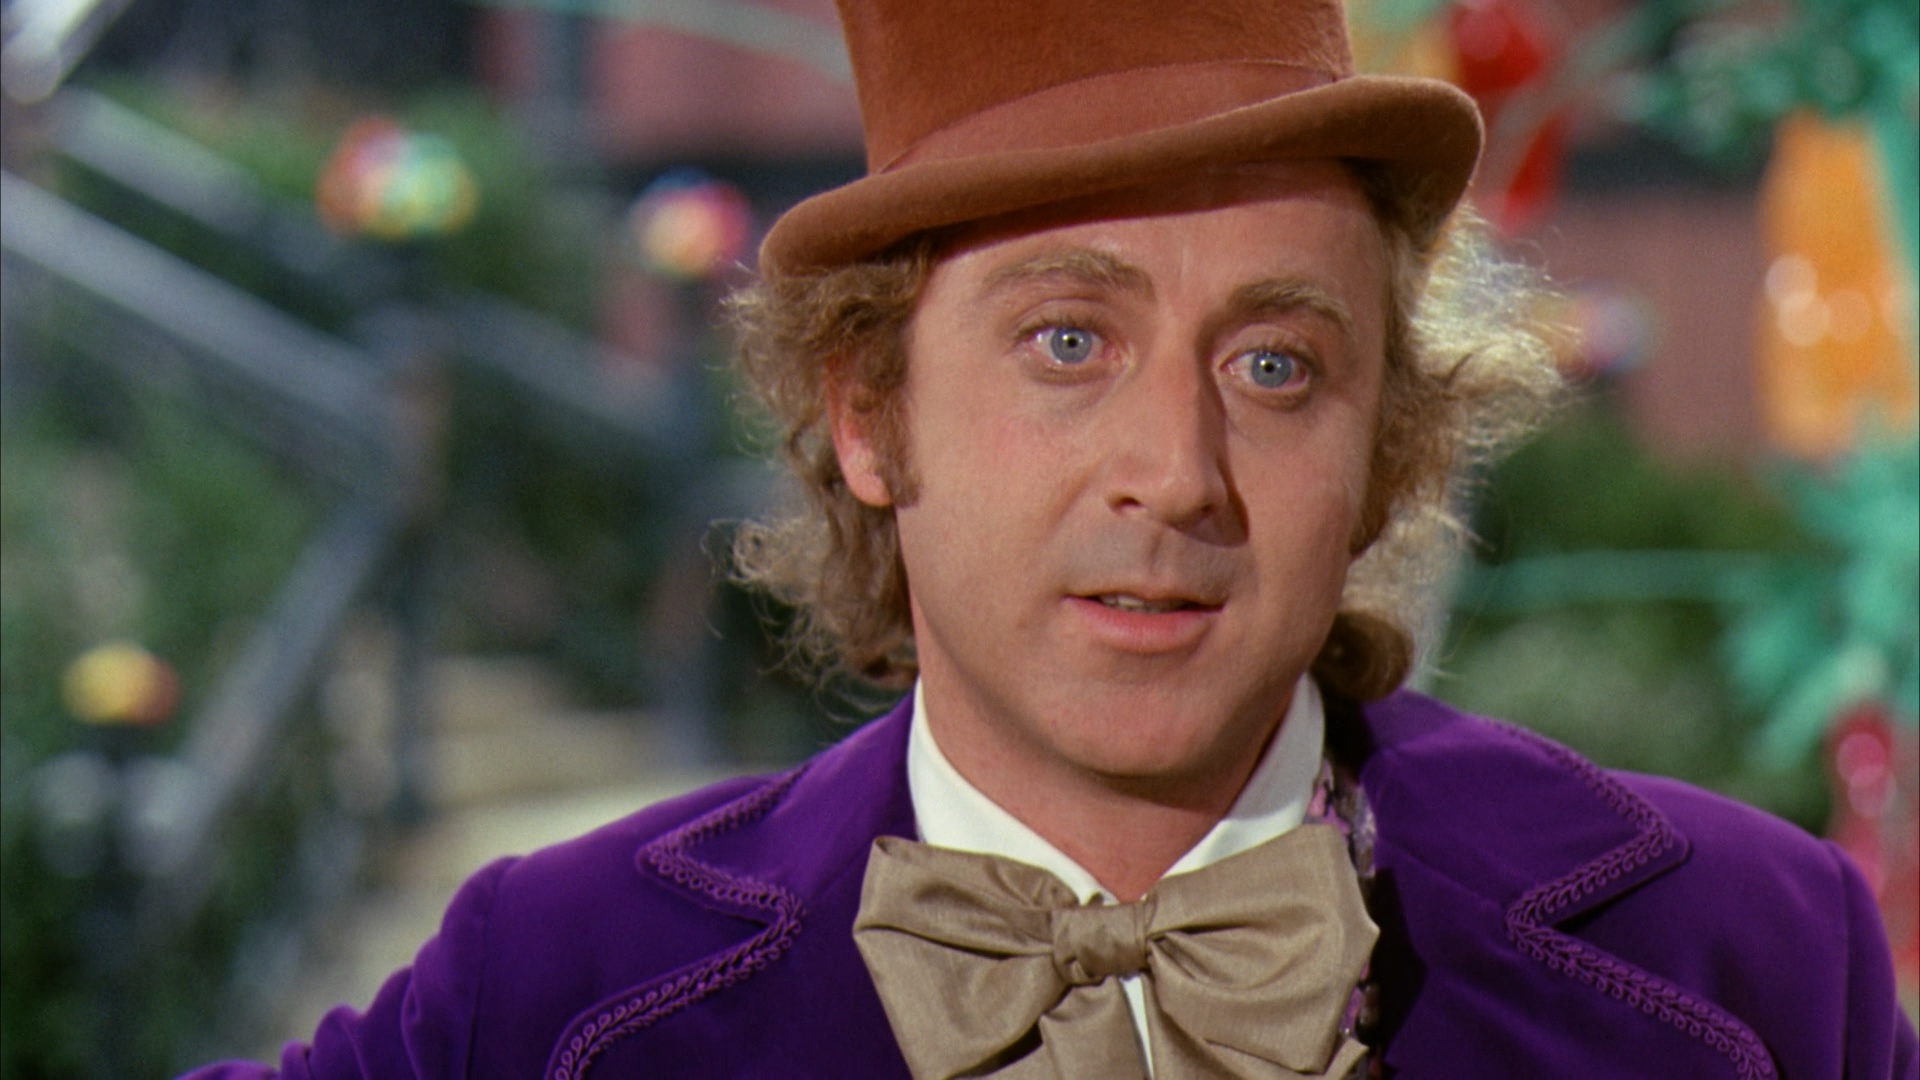 Willy Wonka, Cabin Fever, Chocolate factory, Movie, 1920x1080 Full HD Desktop